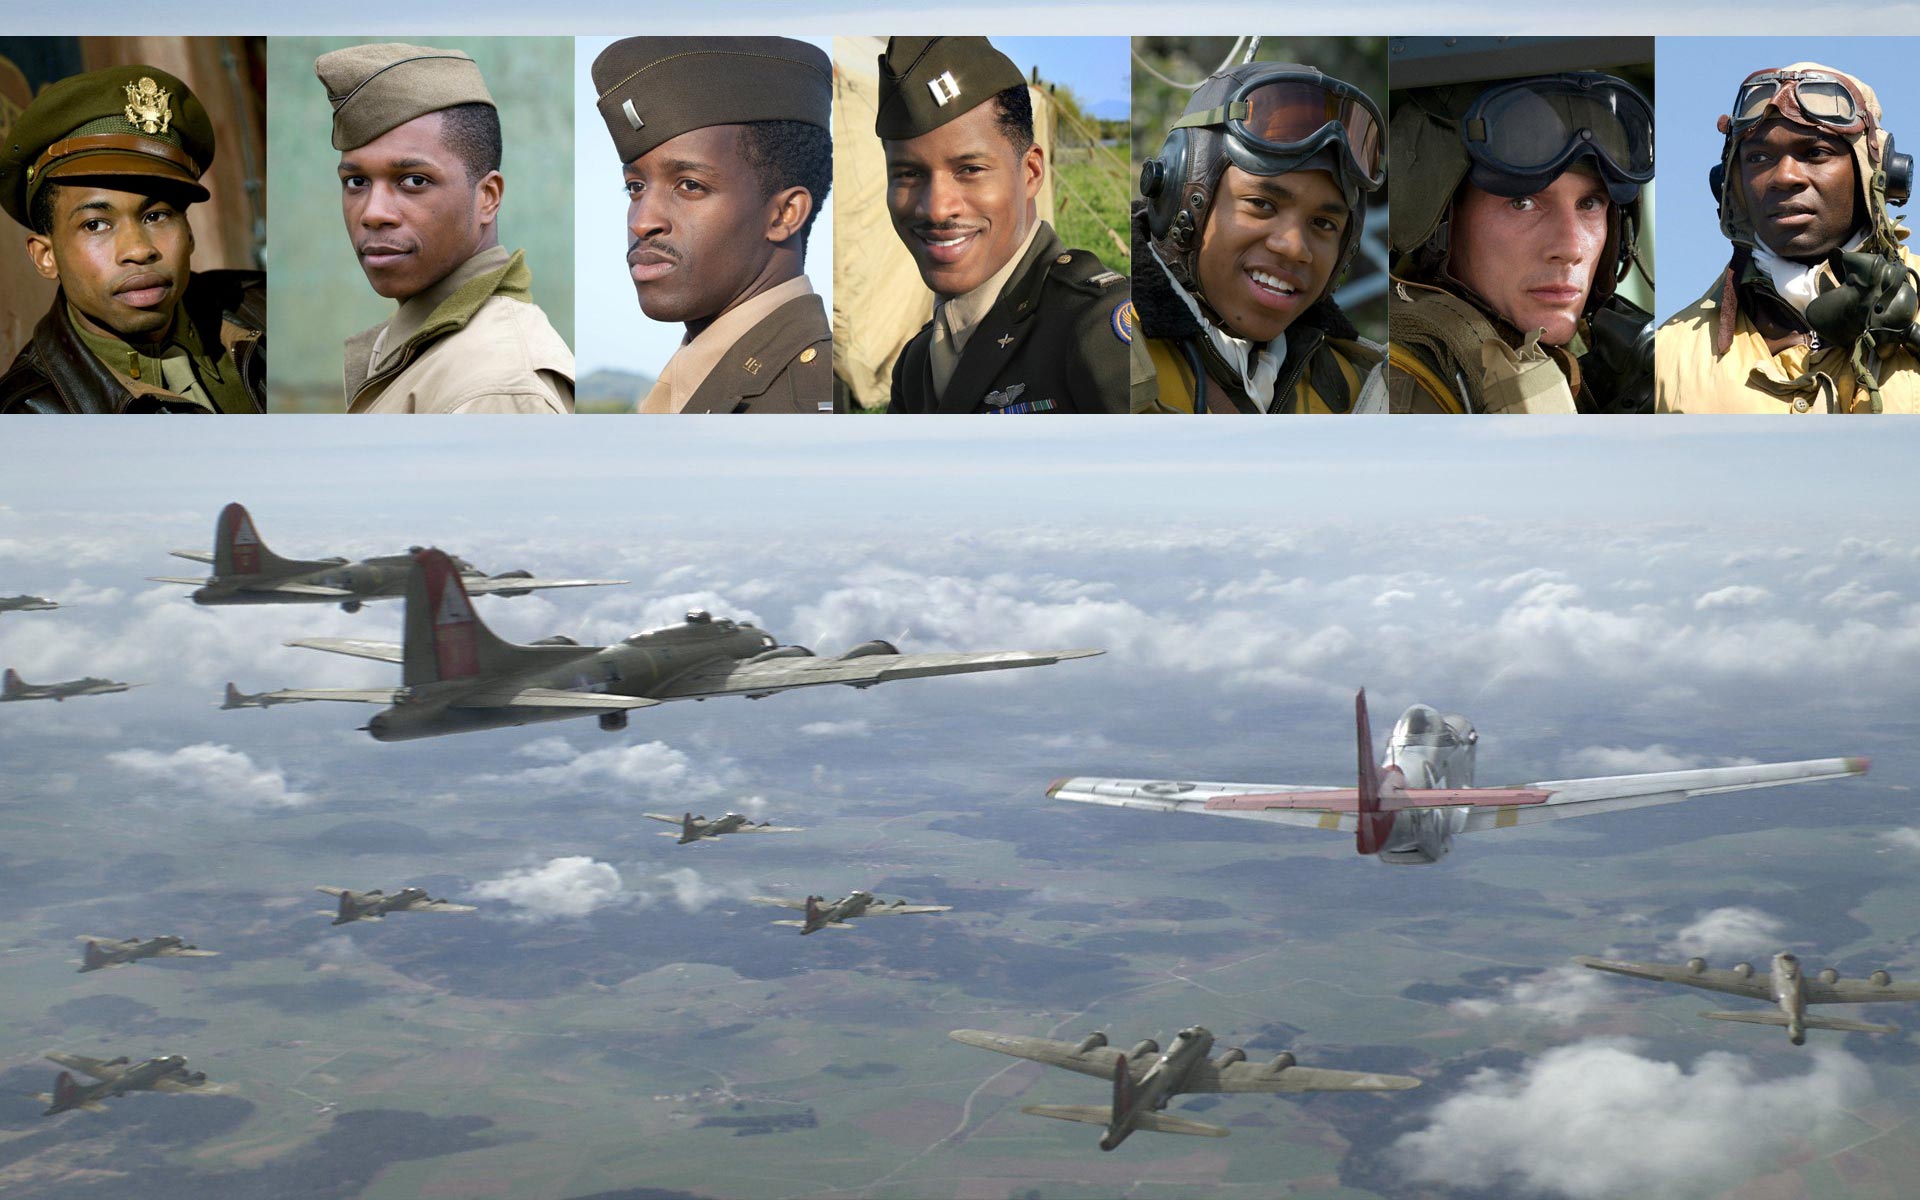 RED TAILS